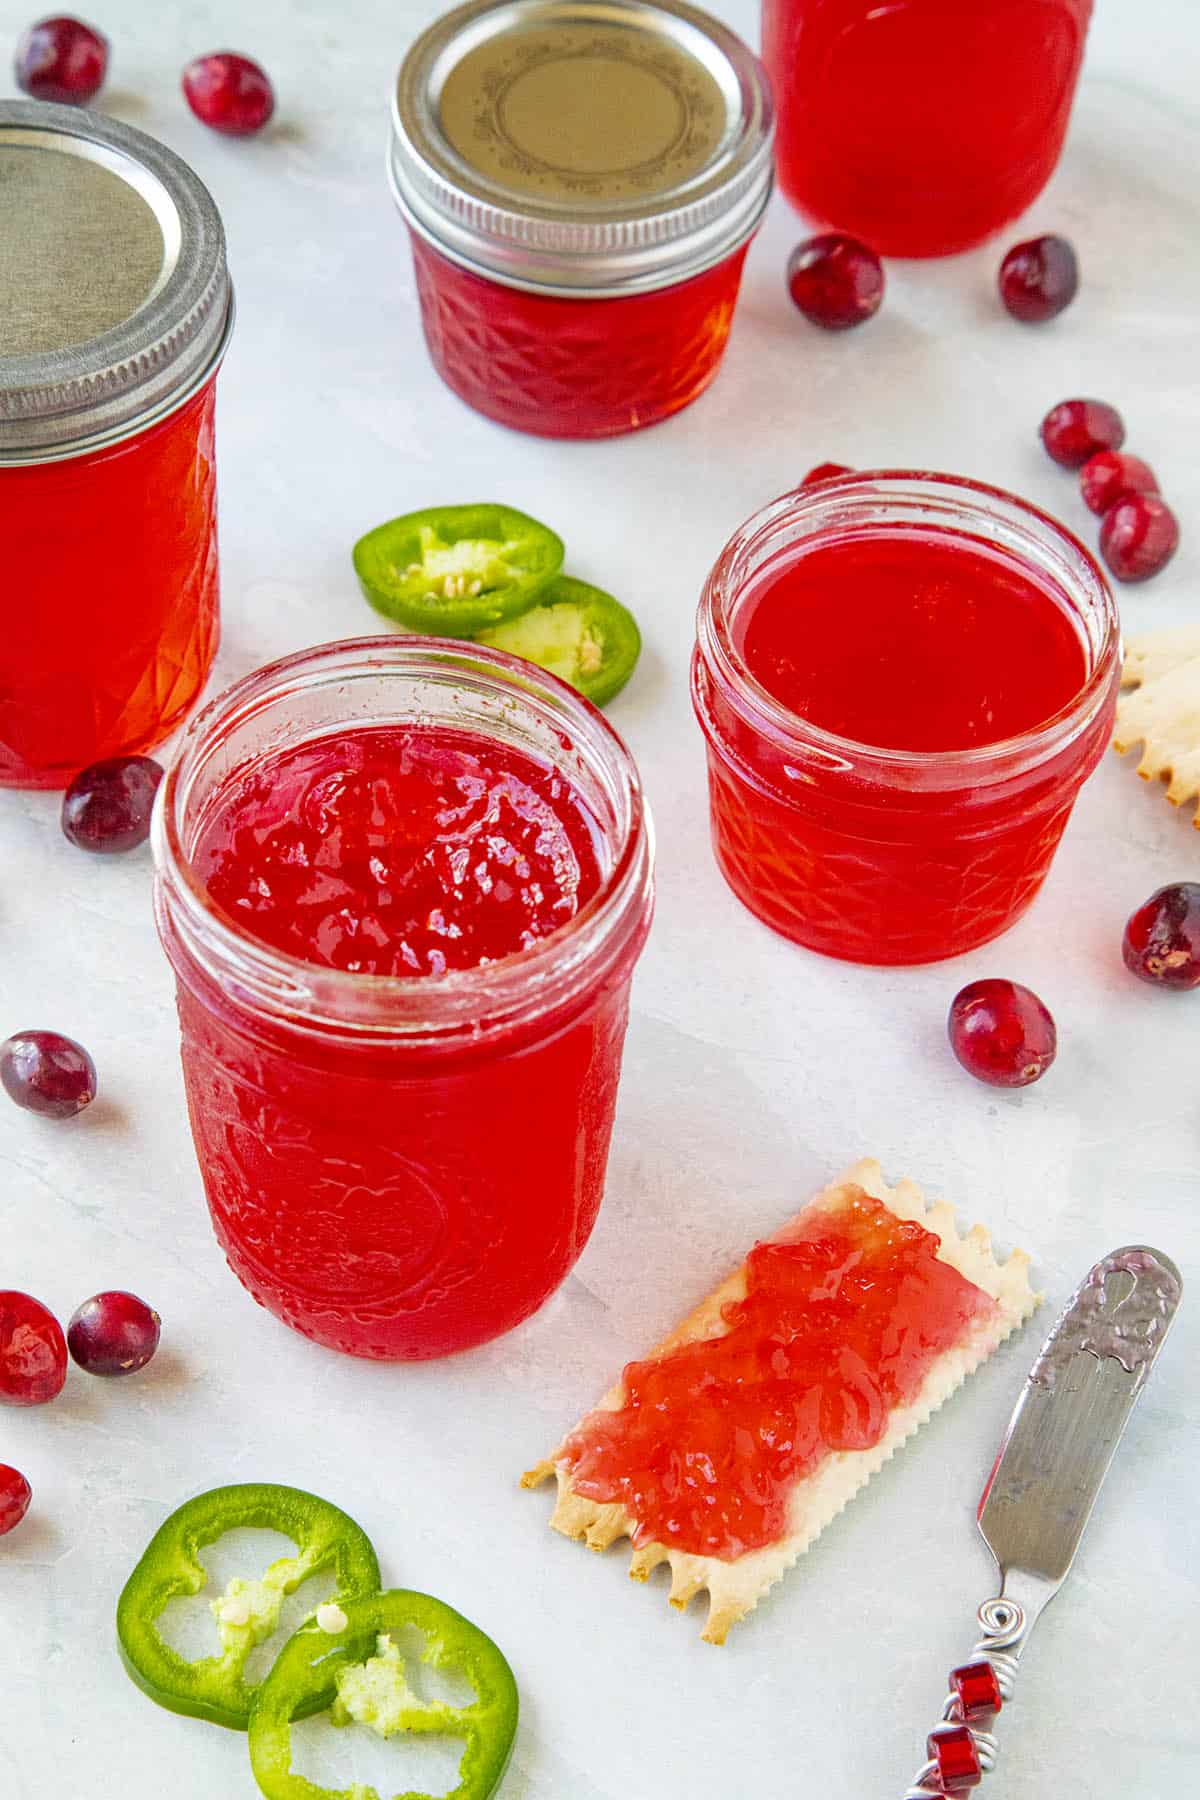 Cranberry Jalapeno Jelly in jars and spread onto a cracker